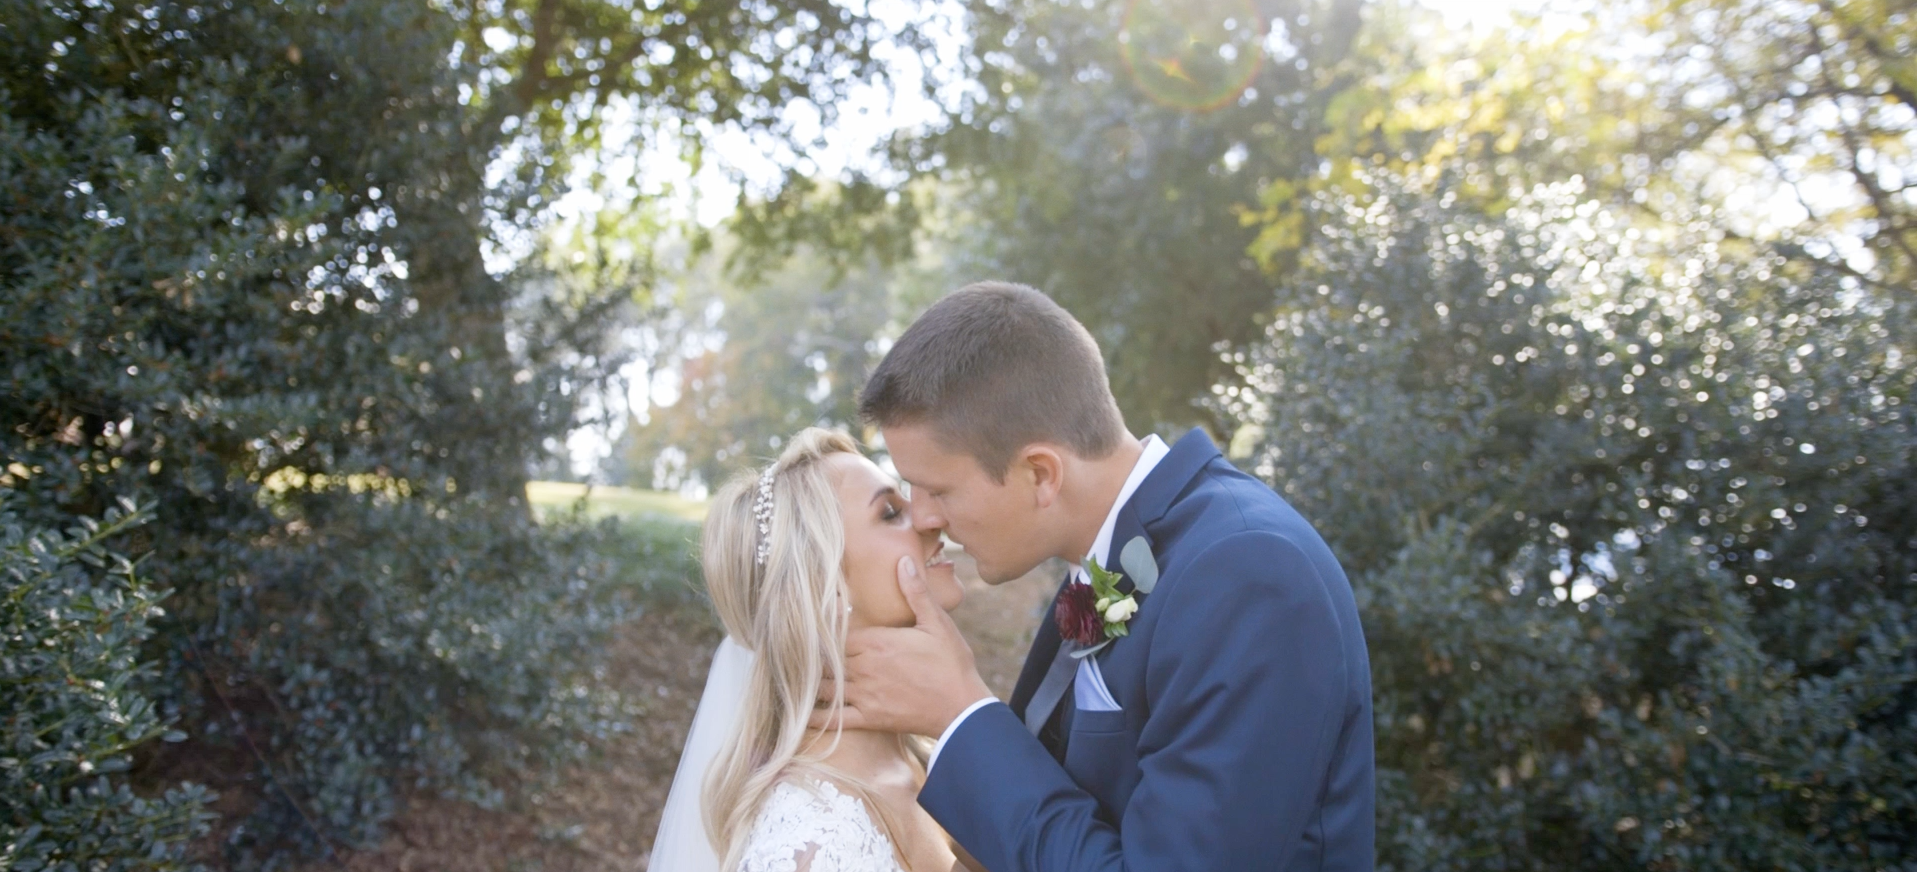 bride and groom kiss during their first look